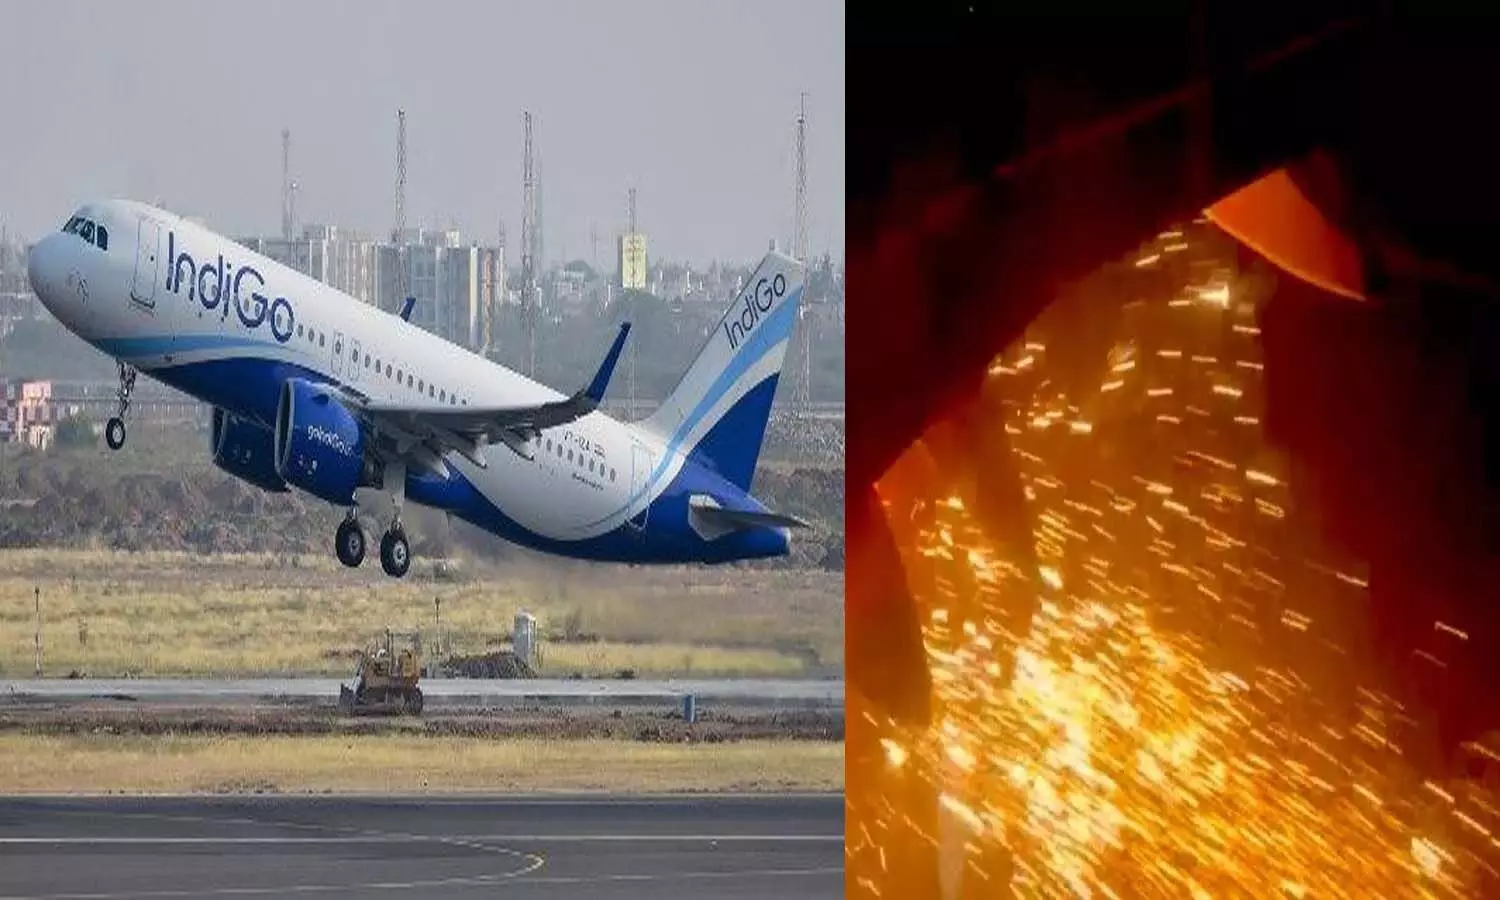 The engine of an Indigo Airlines flight caught fire during take-off at Delhis Indira Gandhi International Airport.